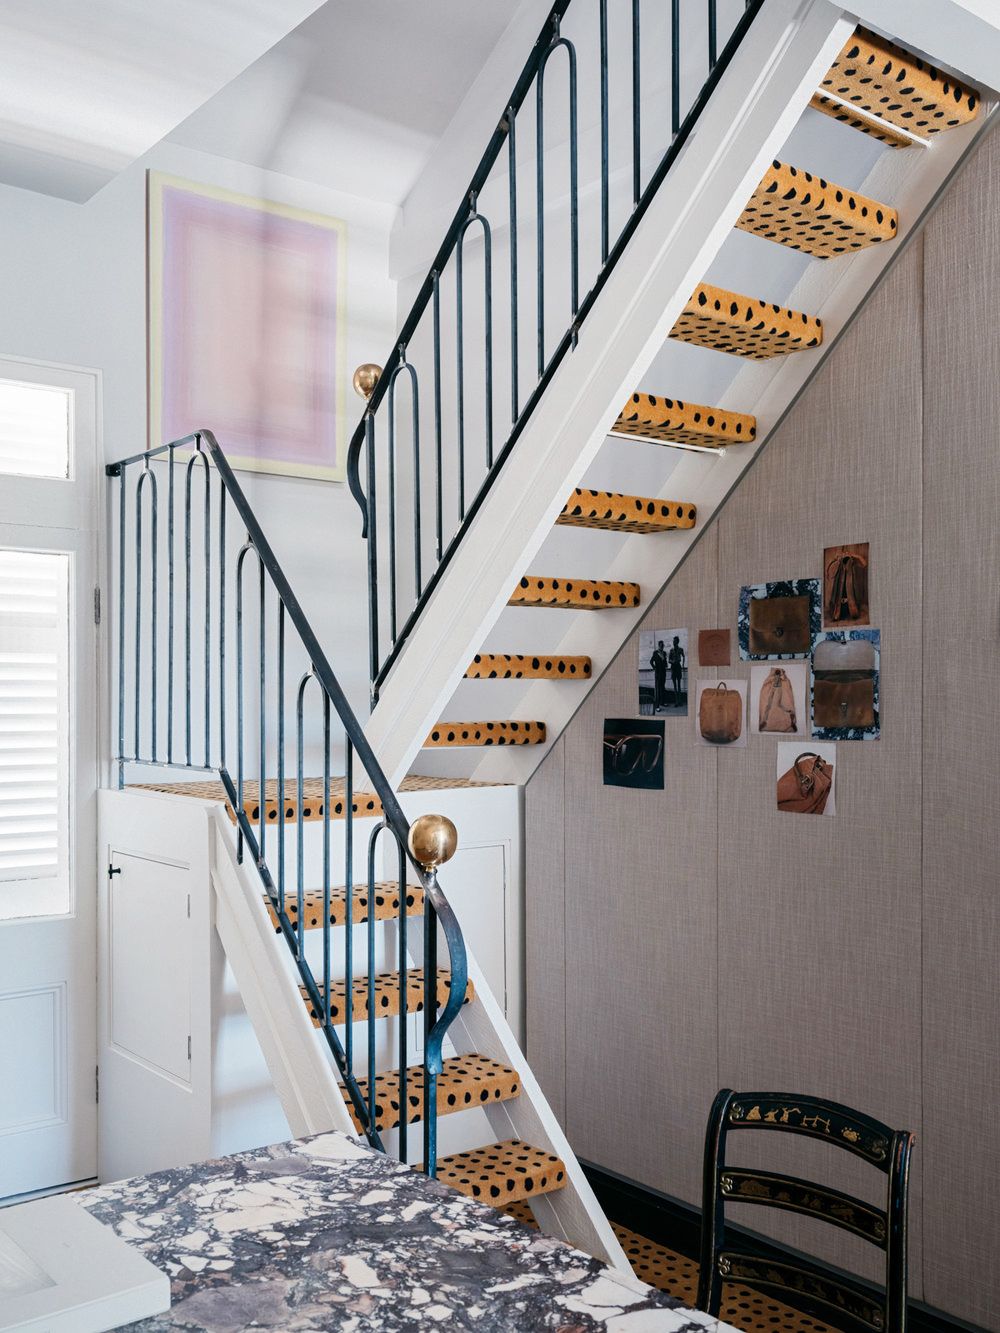 25 Unique Stair Designs - Beautiful Stair Ideas For Your House